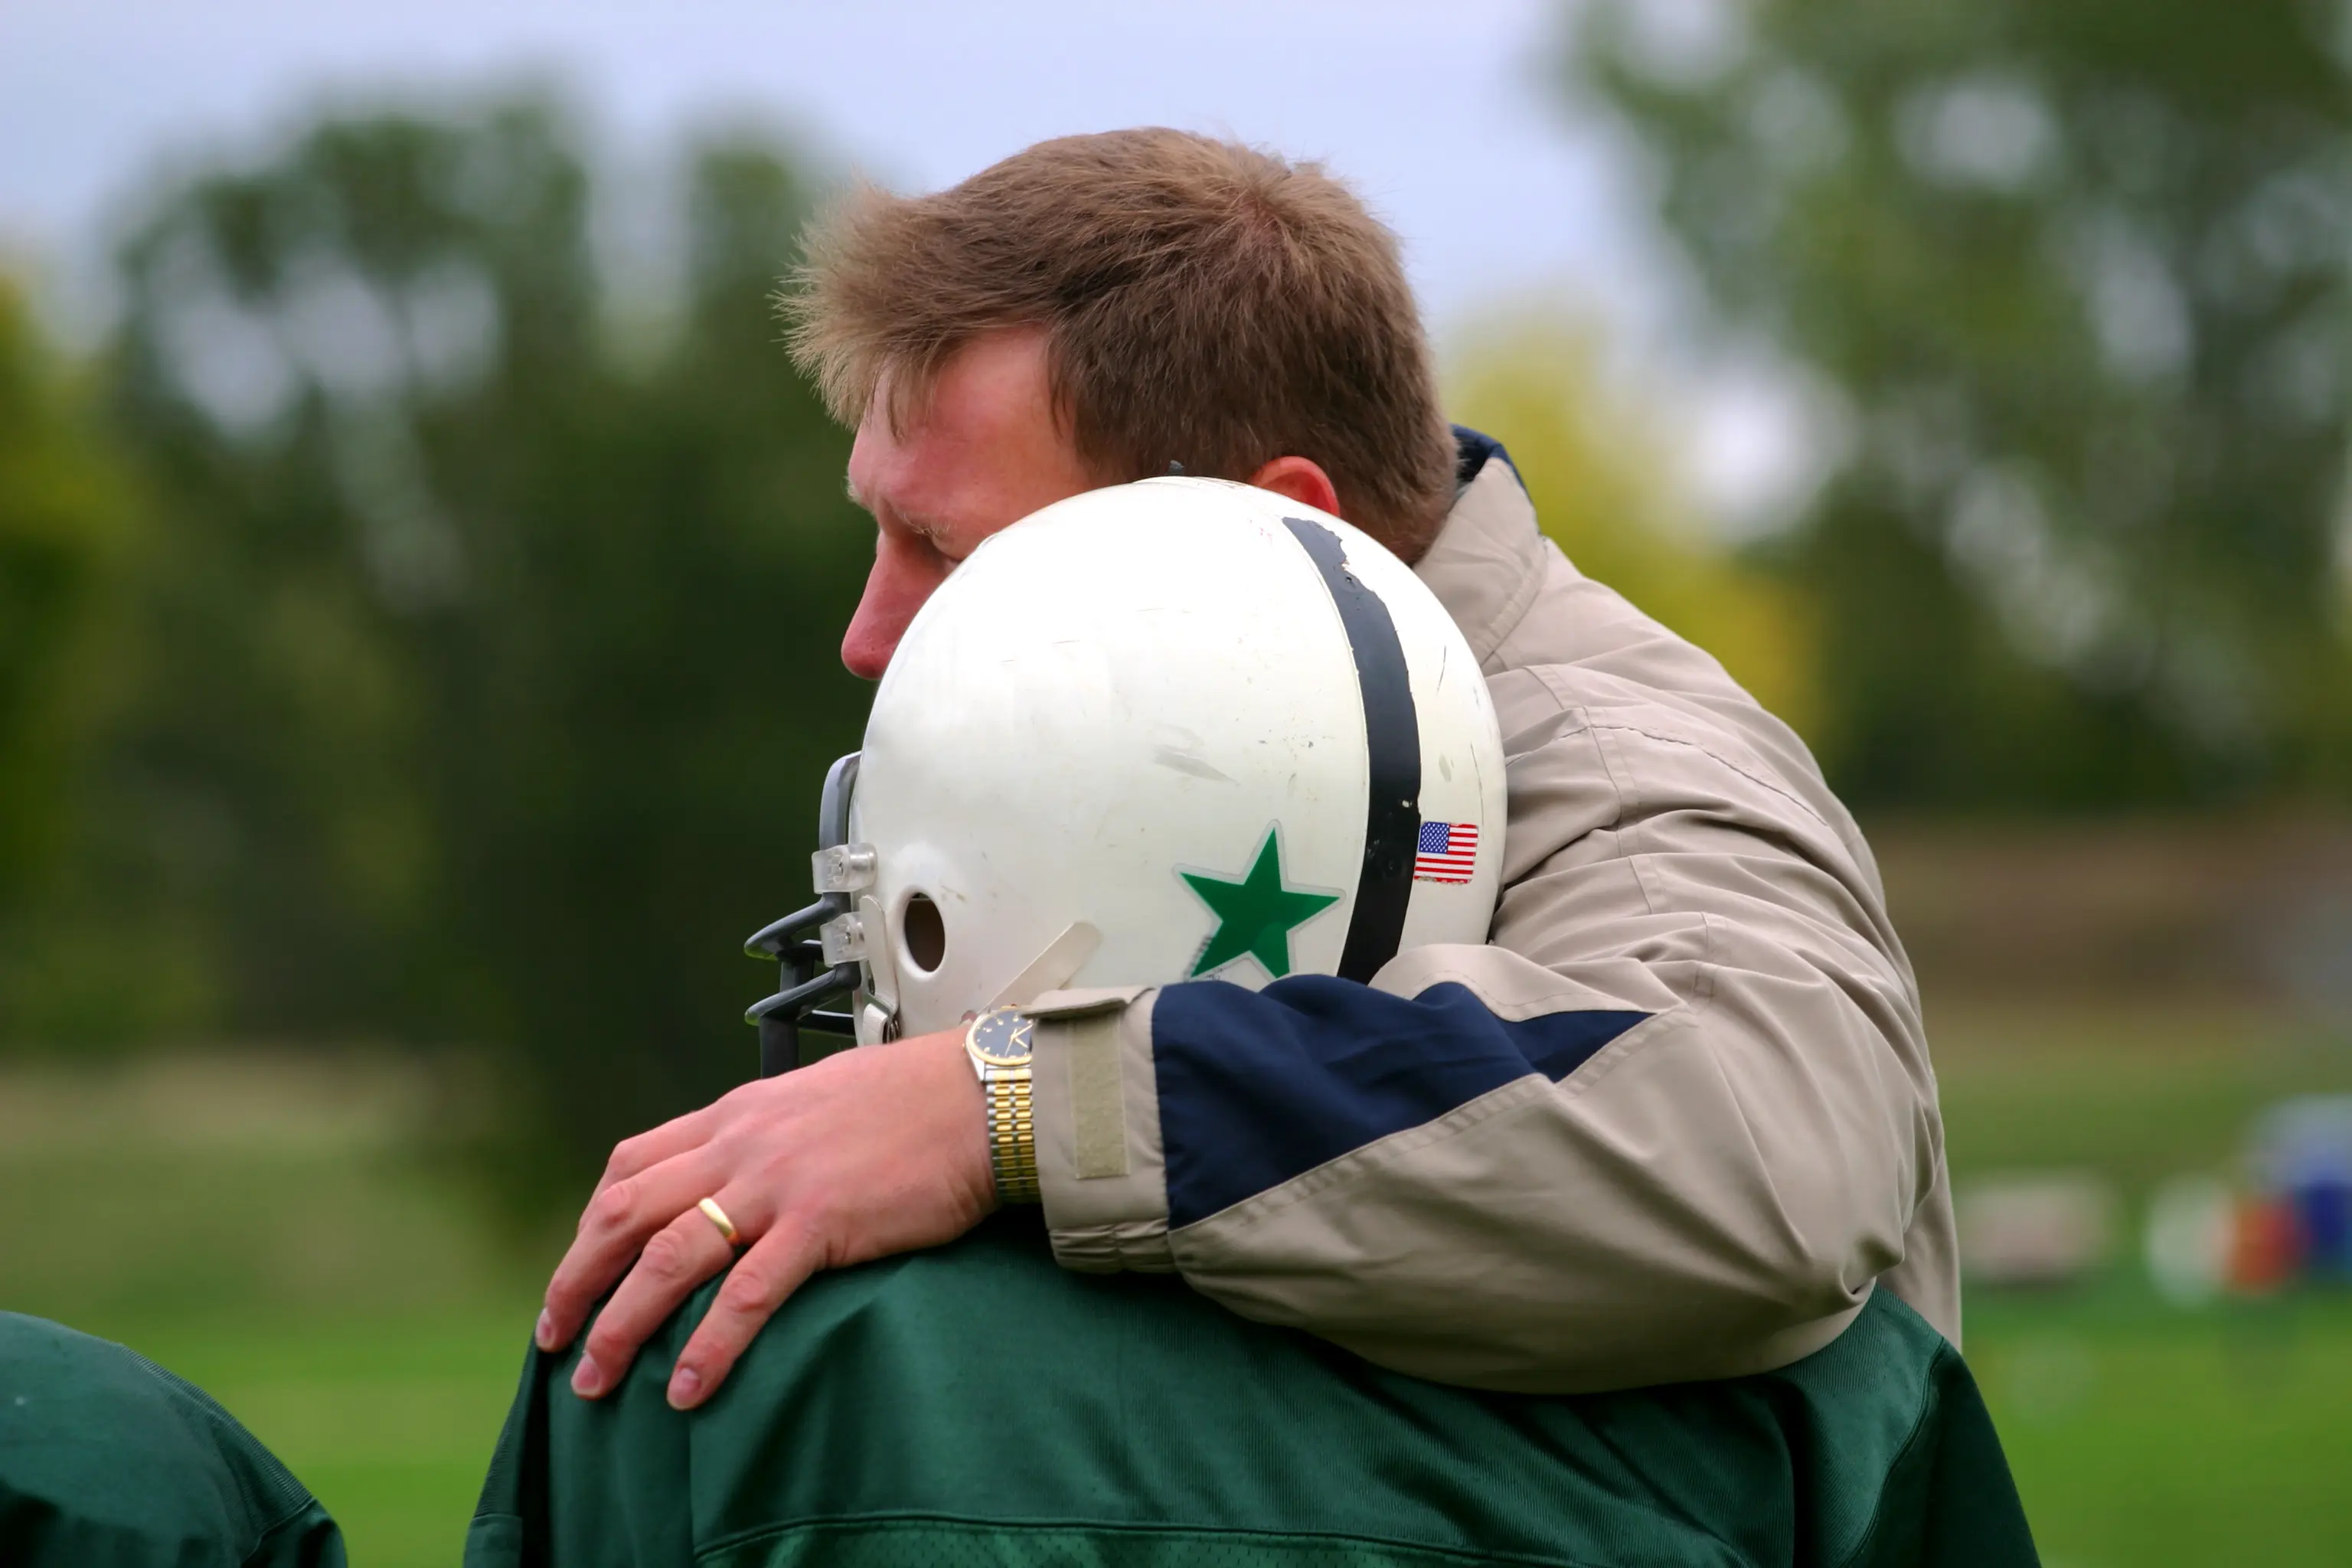 Featured image: The Top 5 Biggest Mistakes Youth Sports Parents Make